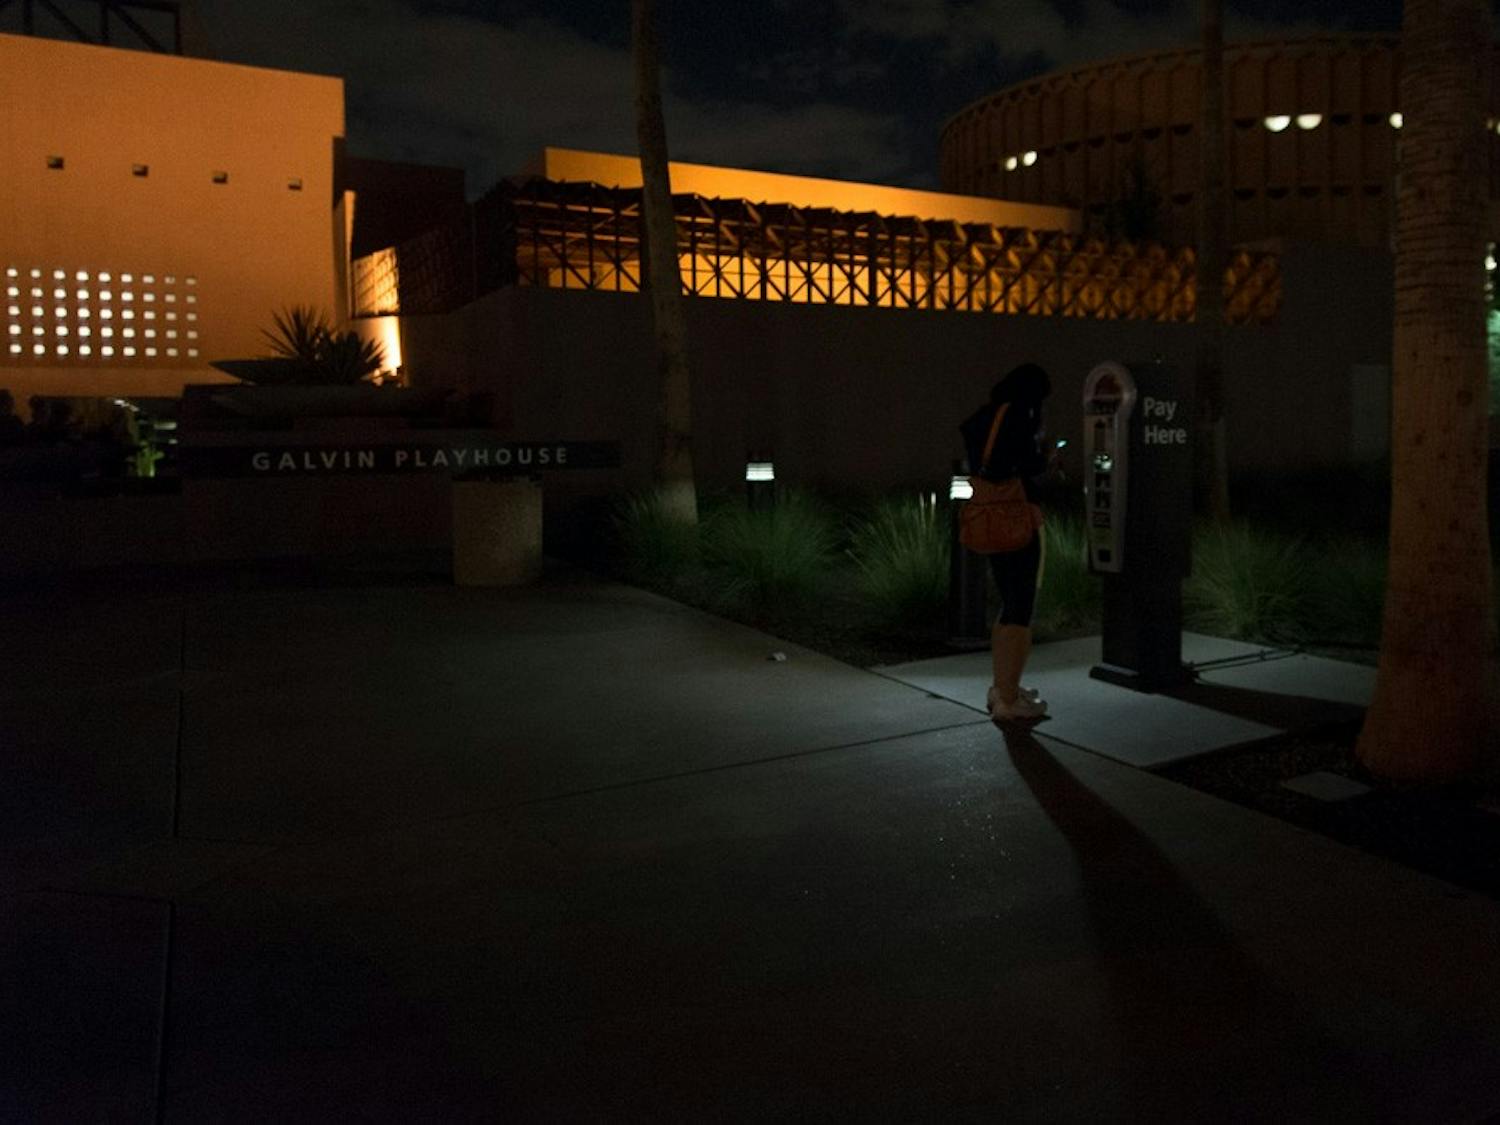 A woman pays for parking in a dimly lit area outside the Galvin Playhouse on Monday, Oct. 5, 2015, on the Tempe campus.